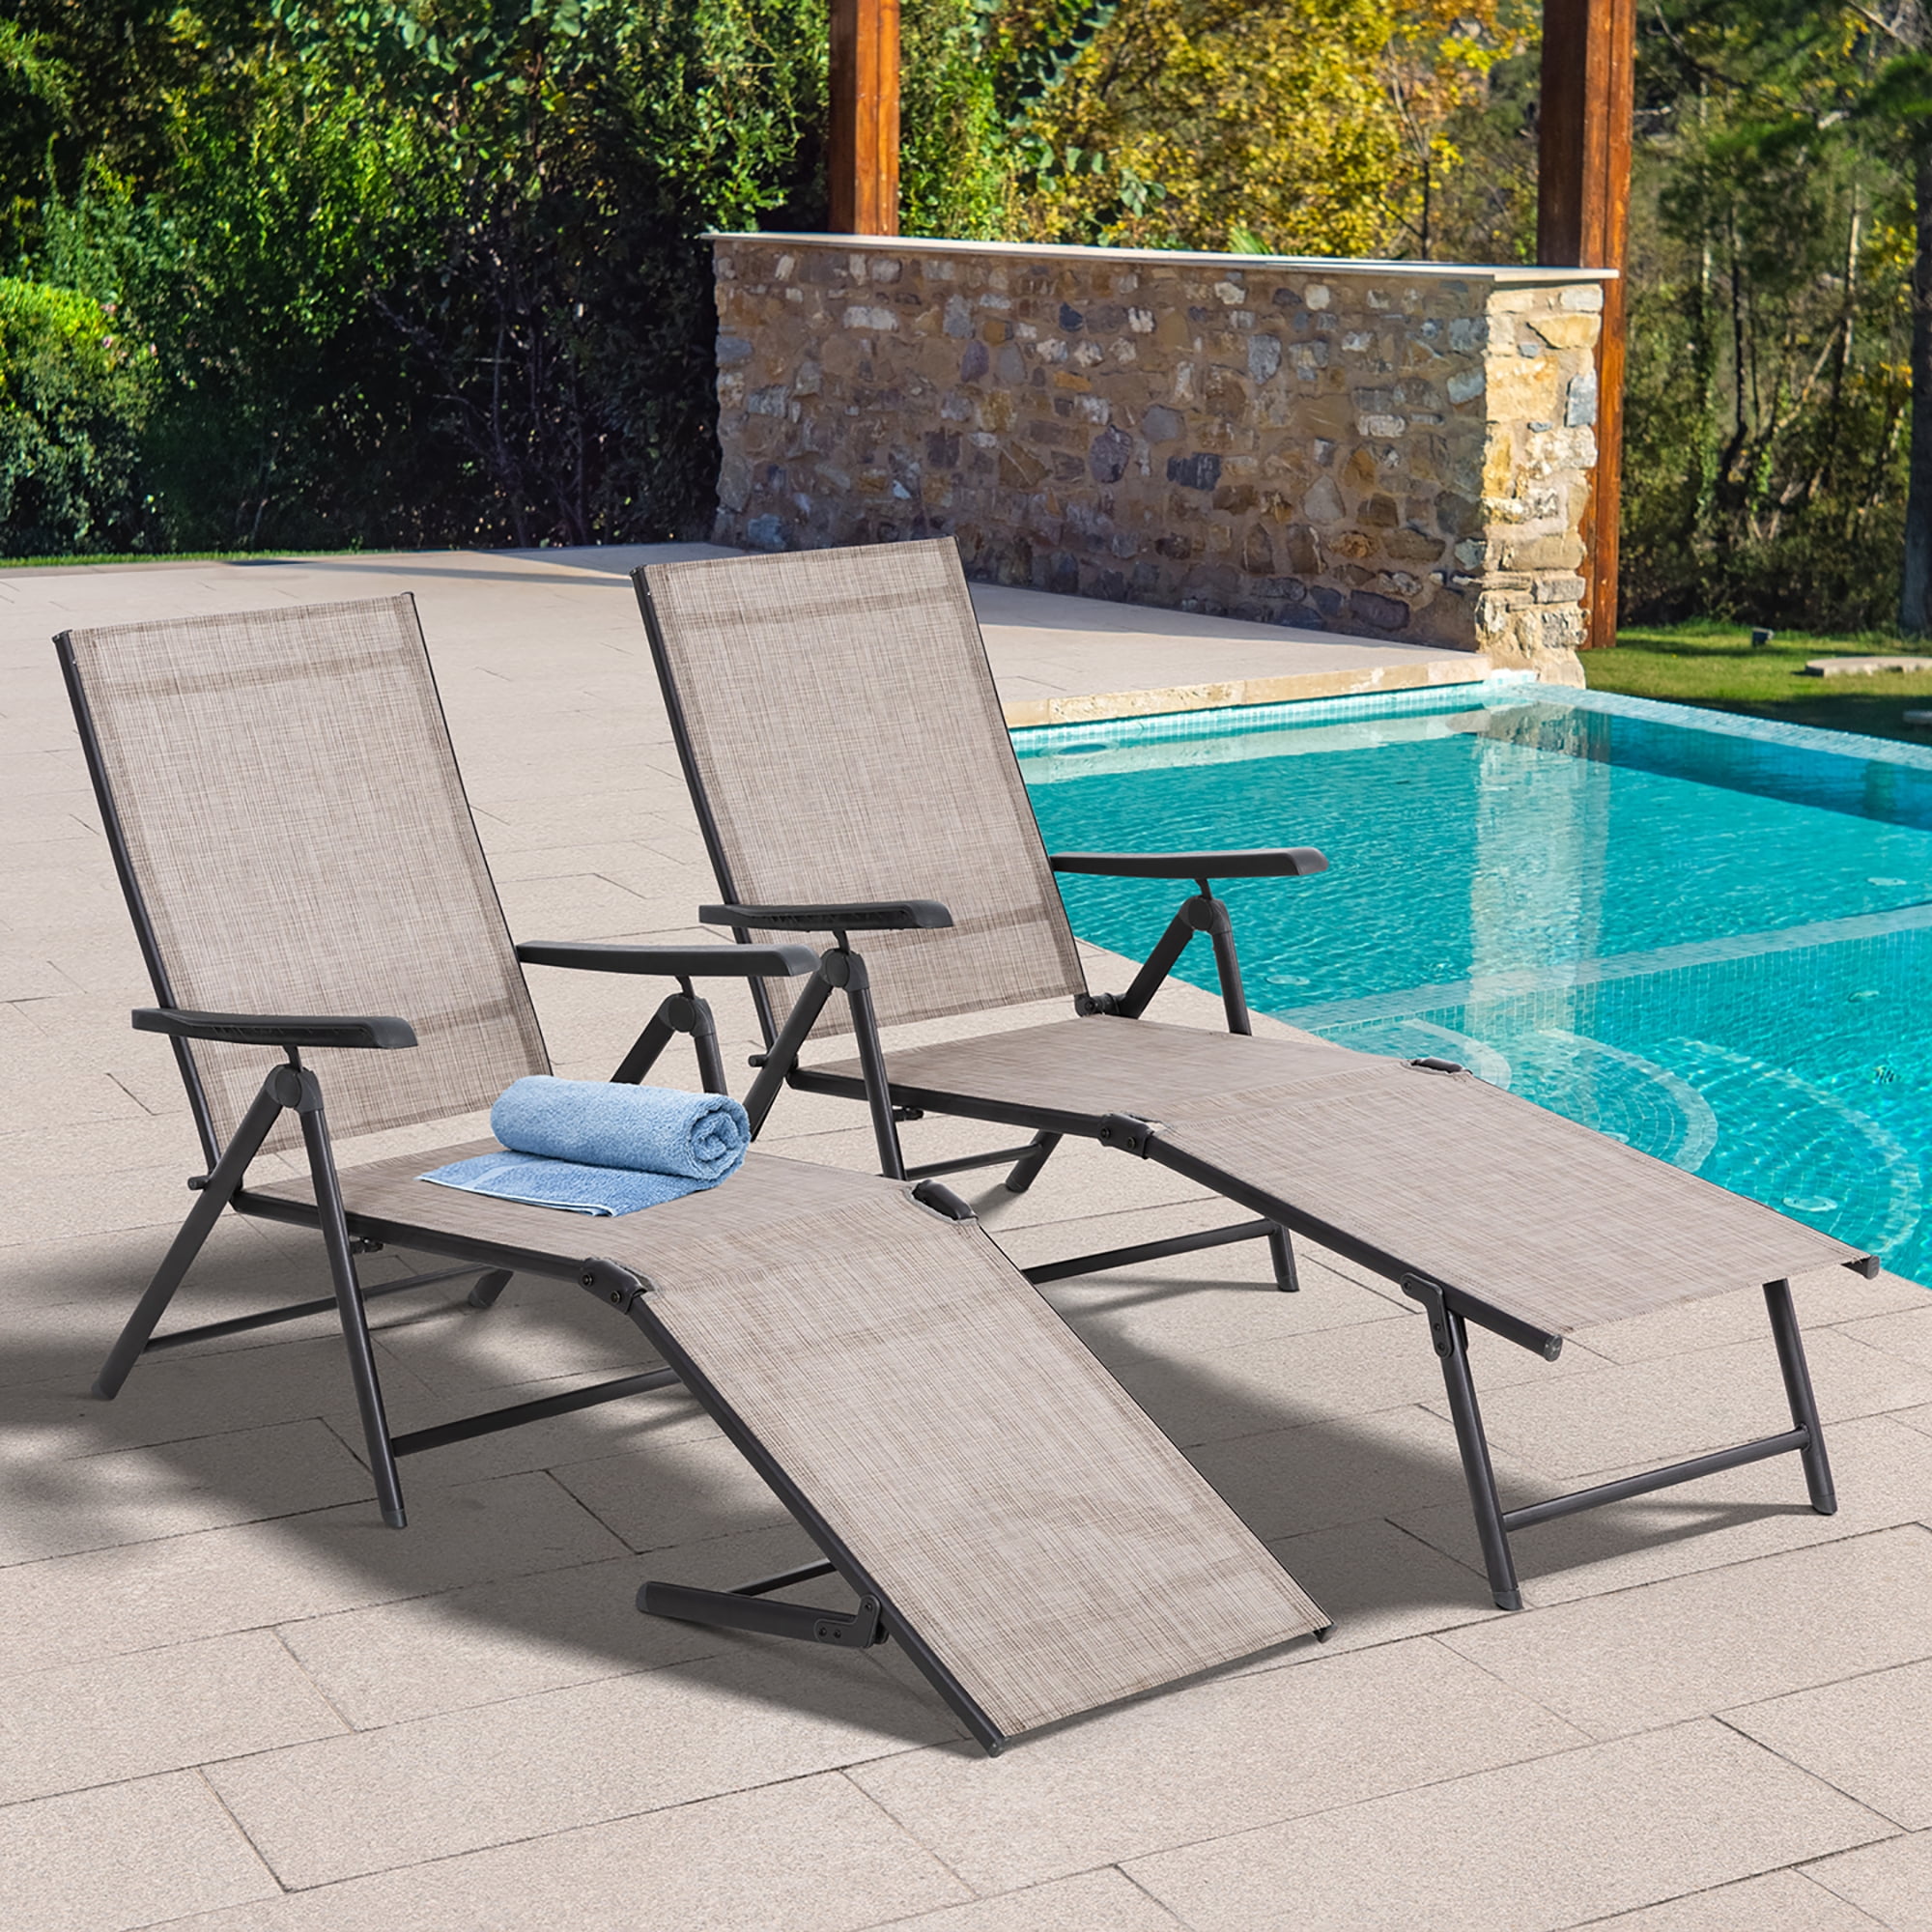 Pro Folding Chaise Lounge Chair Patio Outdoor Pool Beach Lawn Recliner Reclining 